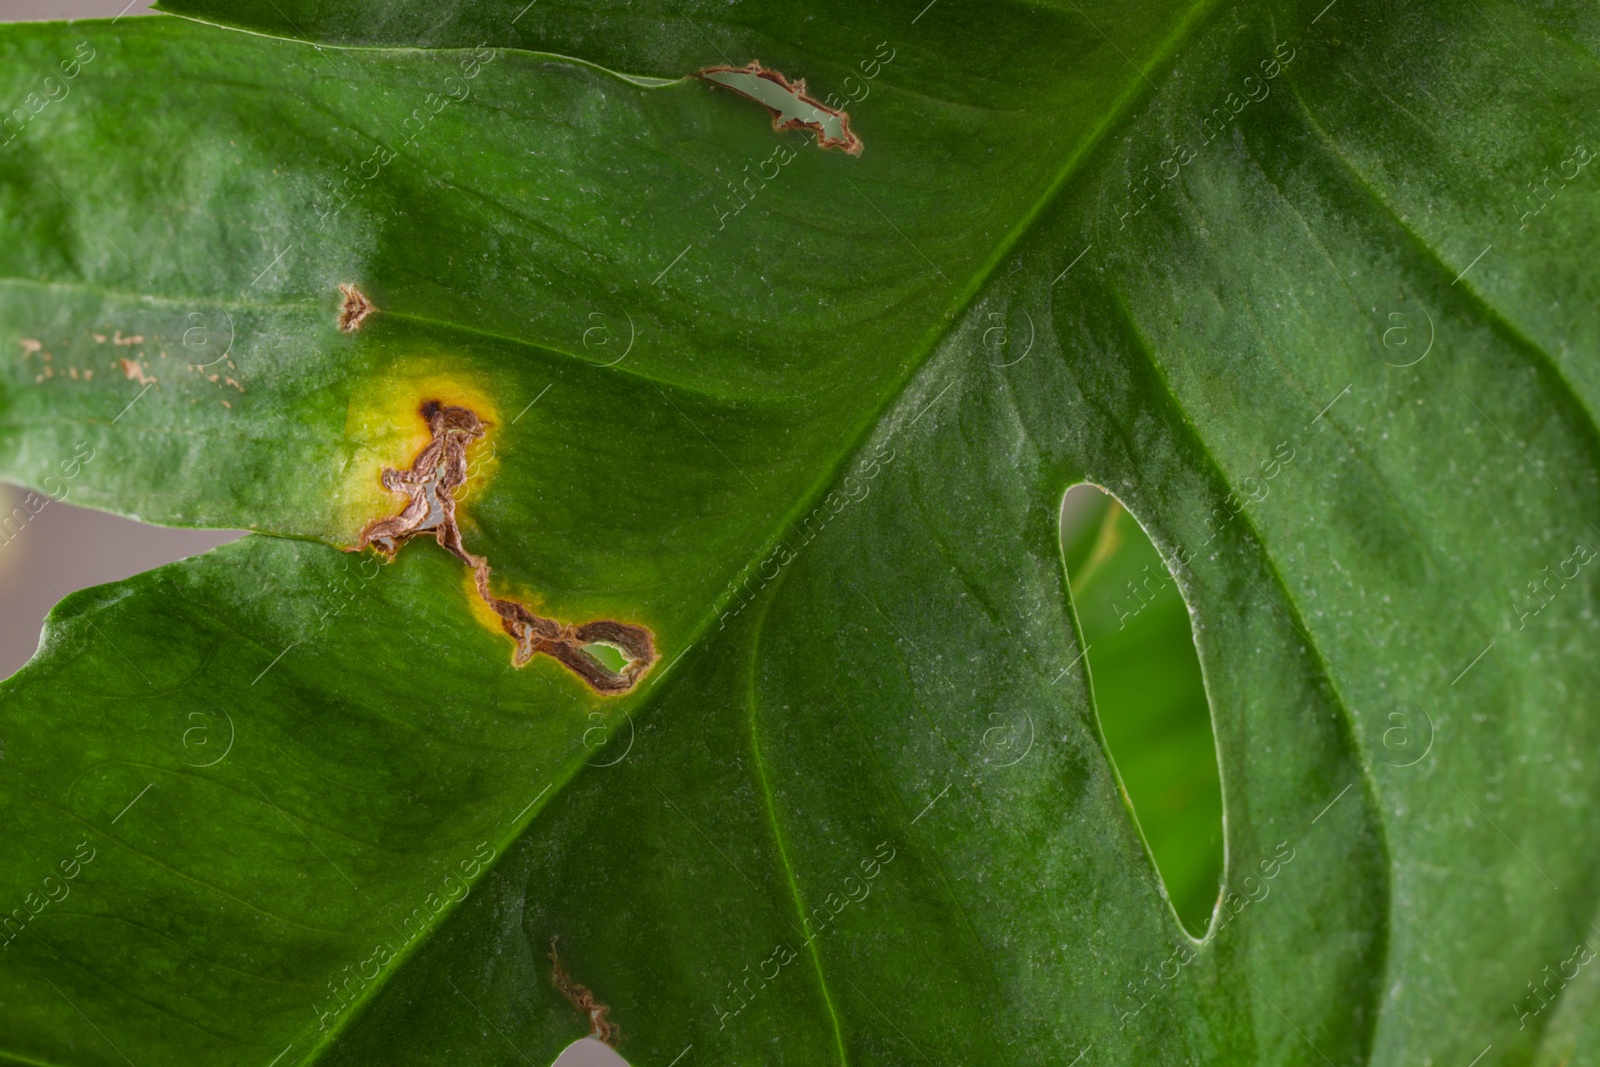 Photo of Potted houseplant with damaged leaf, closeup view